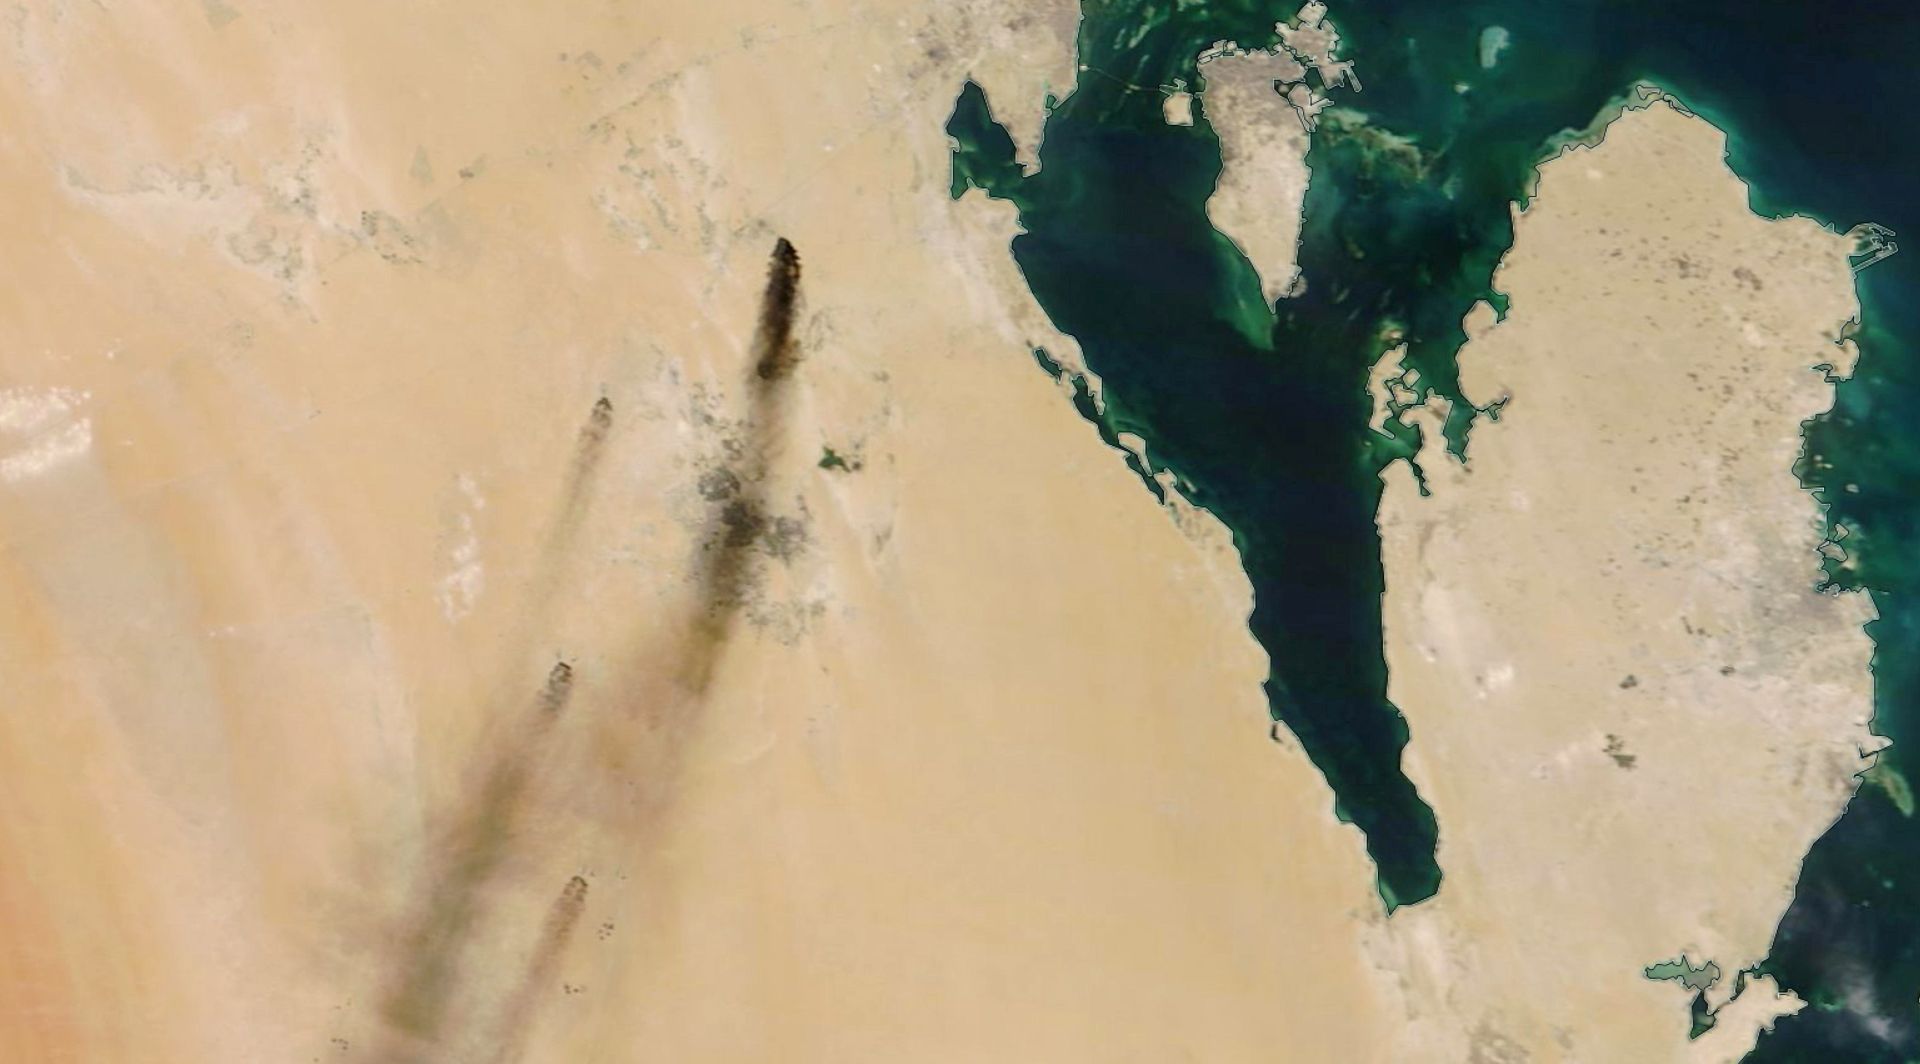 epa07844126 A handout photo made available by NASA Worldview shows a satellite image of smoke from fires at two major oil installations in eastern Saudi Arabia, 14 September 2019 (issued 15 September 2019), following alleged drone attacks claimed by Yemen's Houthi rebels. According to Saudi state-owned oil company Aramco, two of its oil facilities in Saudi Arabia, Khurais and Abqaiq, were set on fire on 14 September after allegedly having been targeted by drone attacks. In picture is seen Bahrain (island, top) and Qatar (peninsula, R).  EPA/NASA WORLDVIEW HANDOUT  HANDOUT EDITORIAL USE ONLY/NO SALES